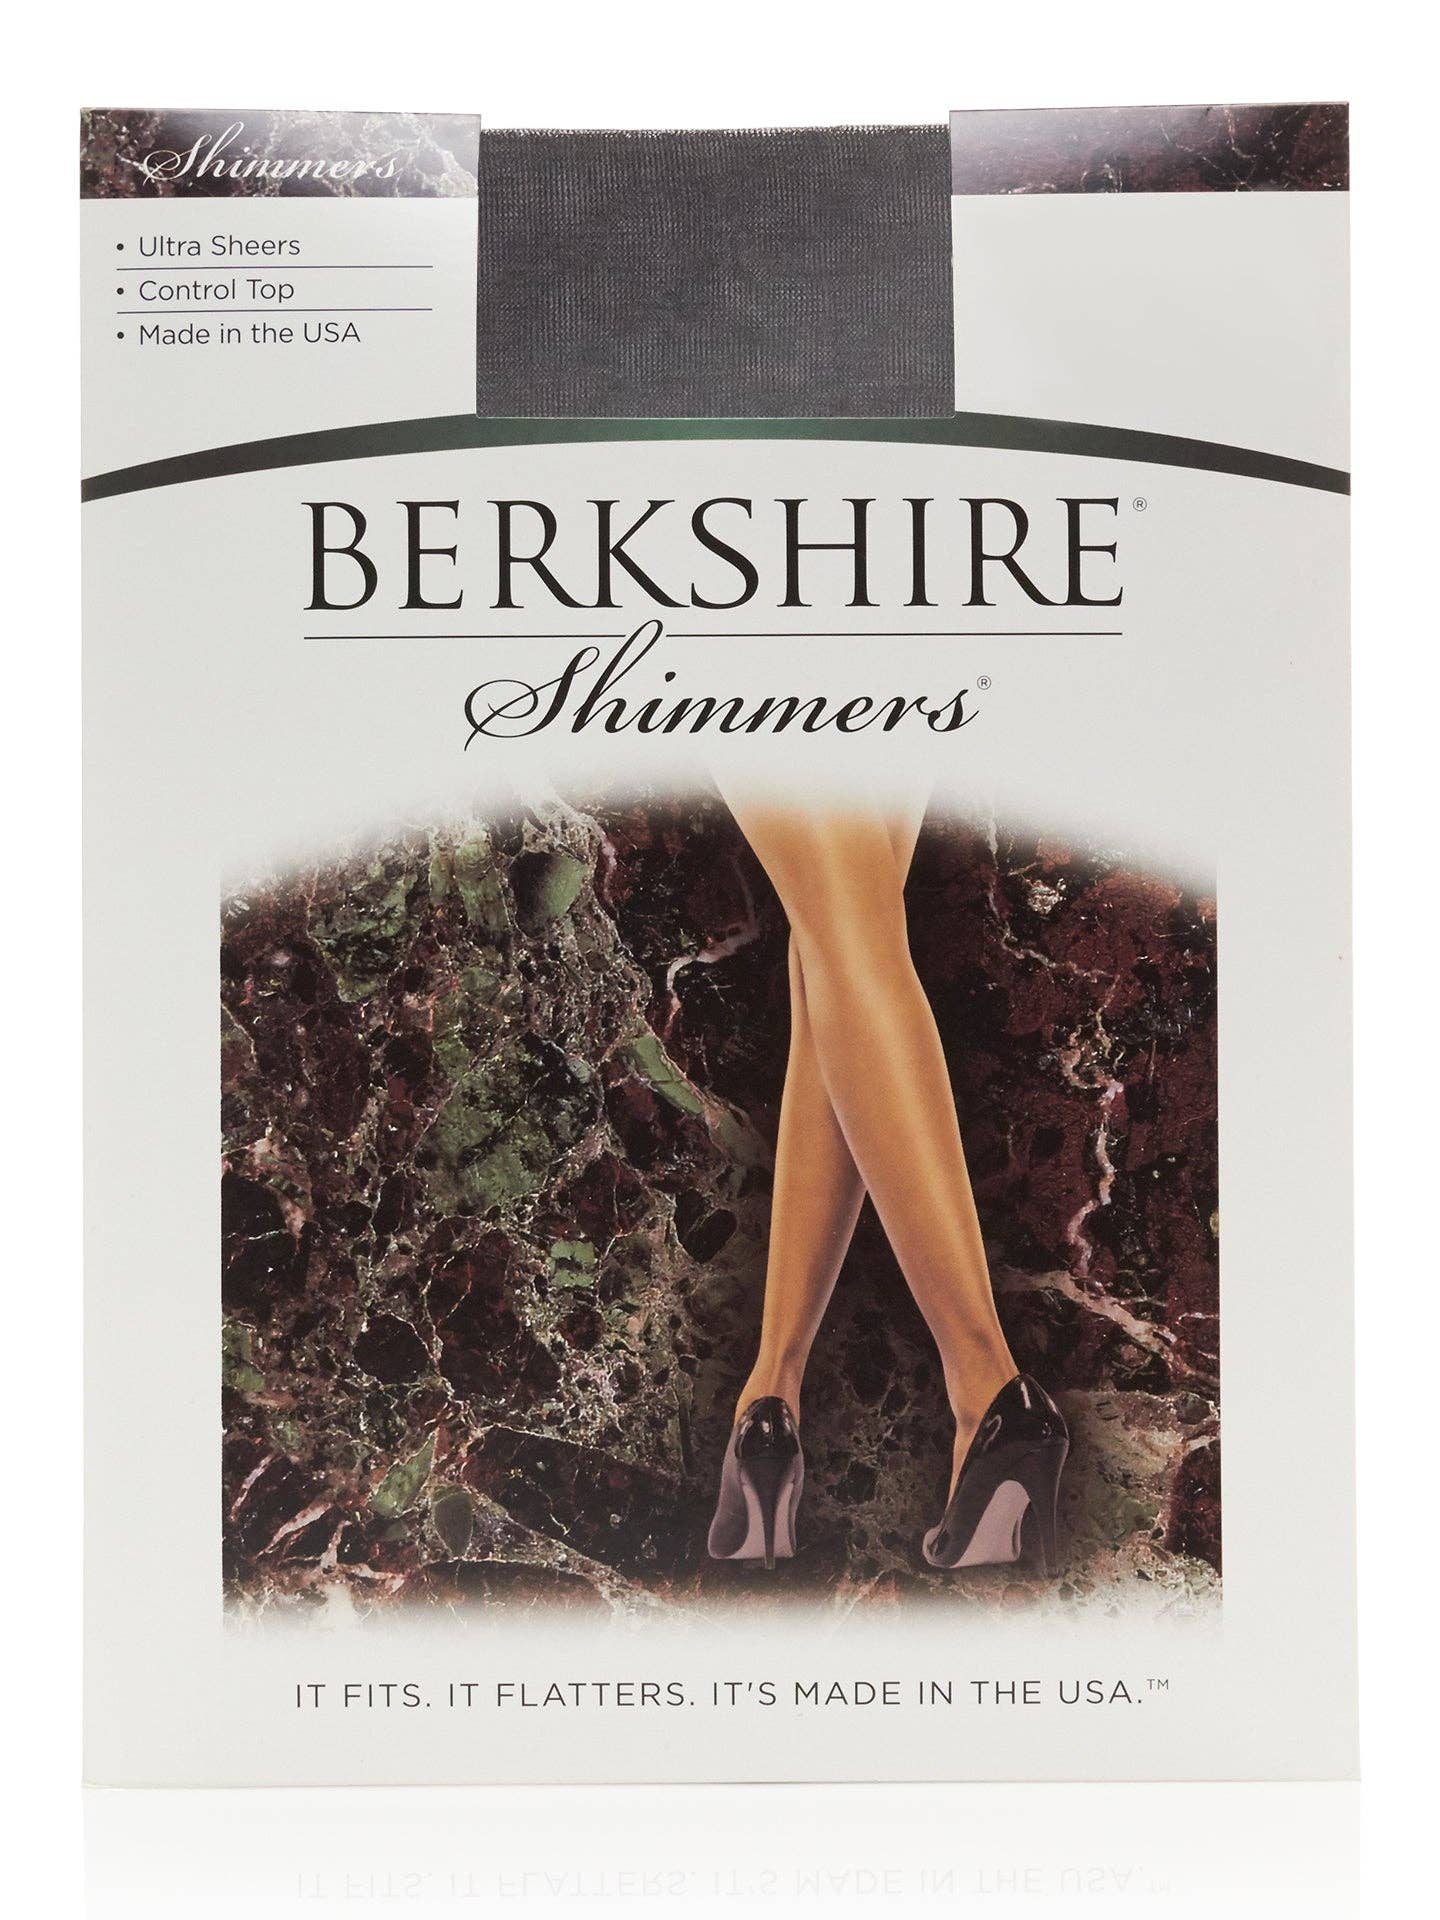 Shimmers Ultra Sheer Control Top Pantyhose - Black / 4